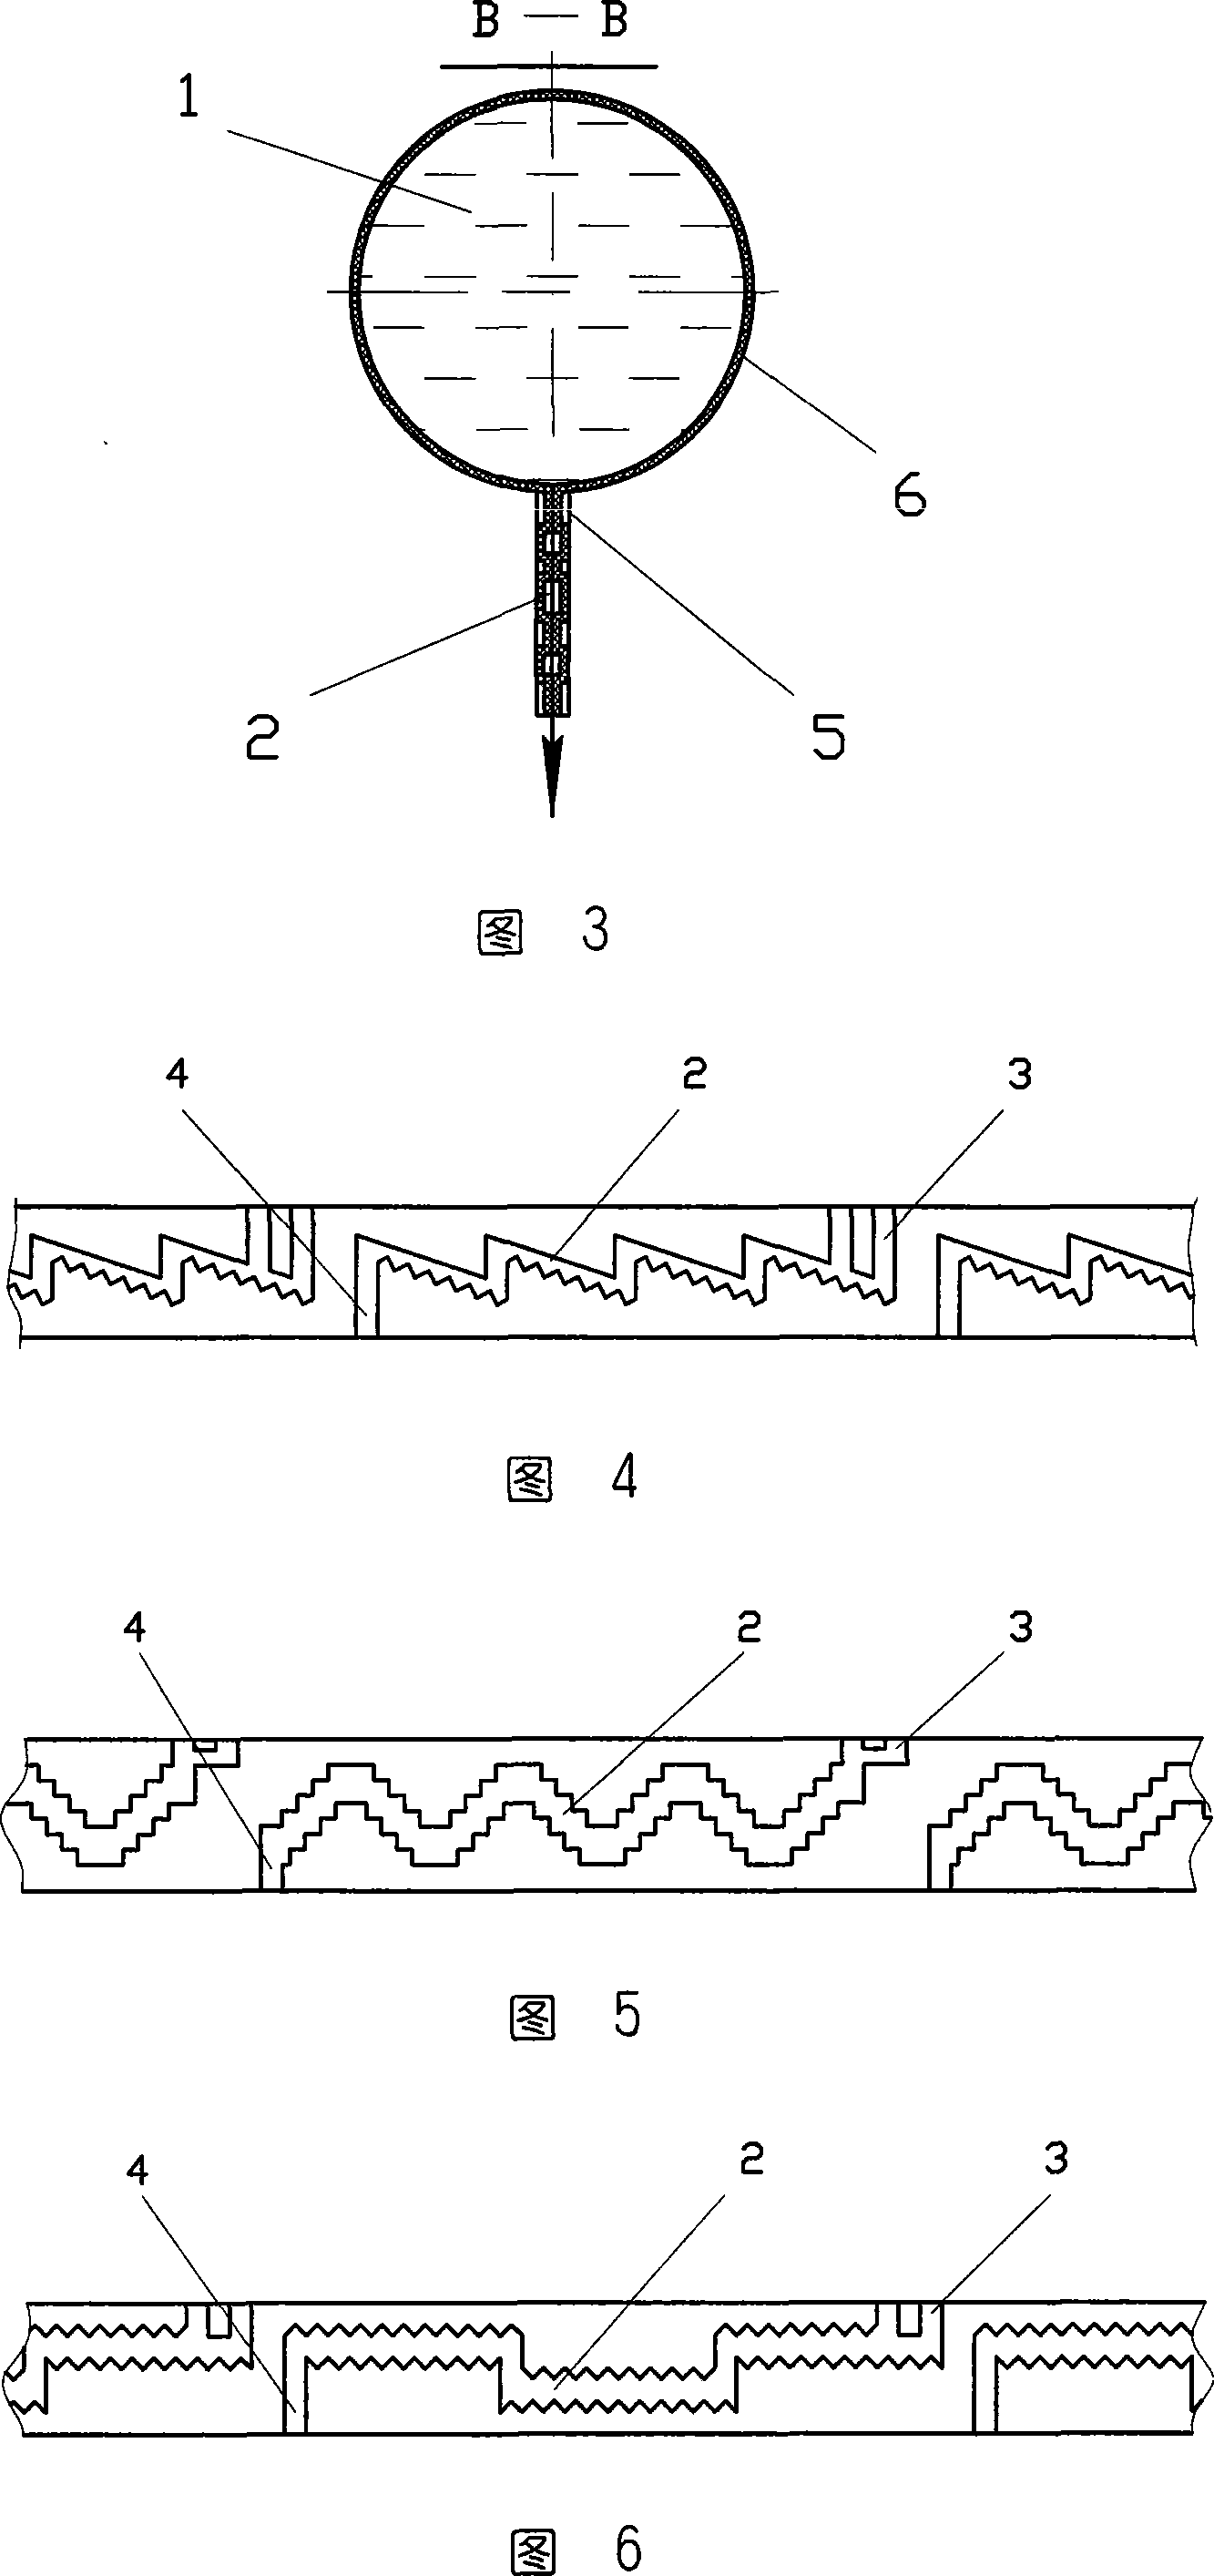 Drip irrigation band for printing labyrinth flow-path and processing method